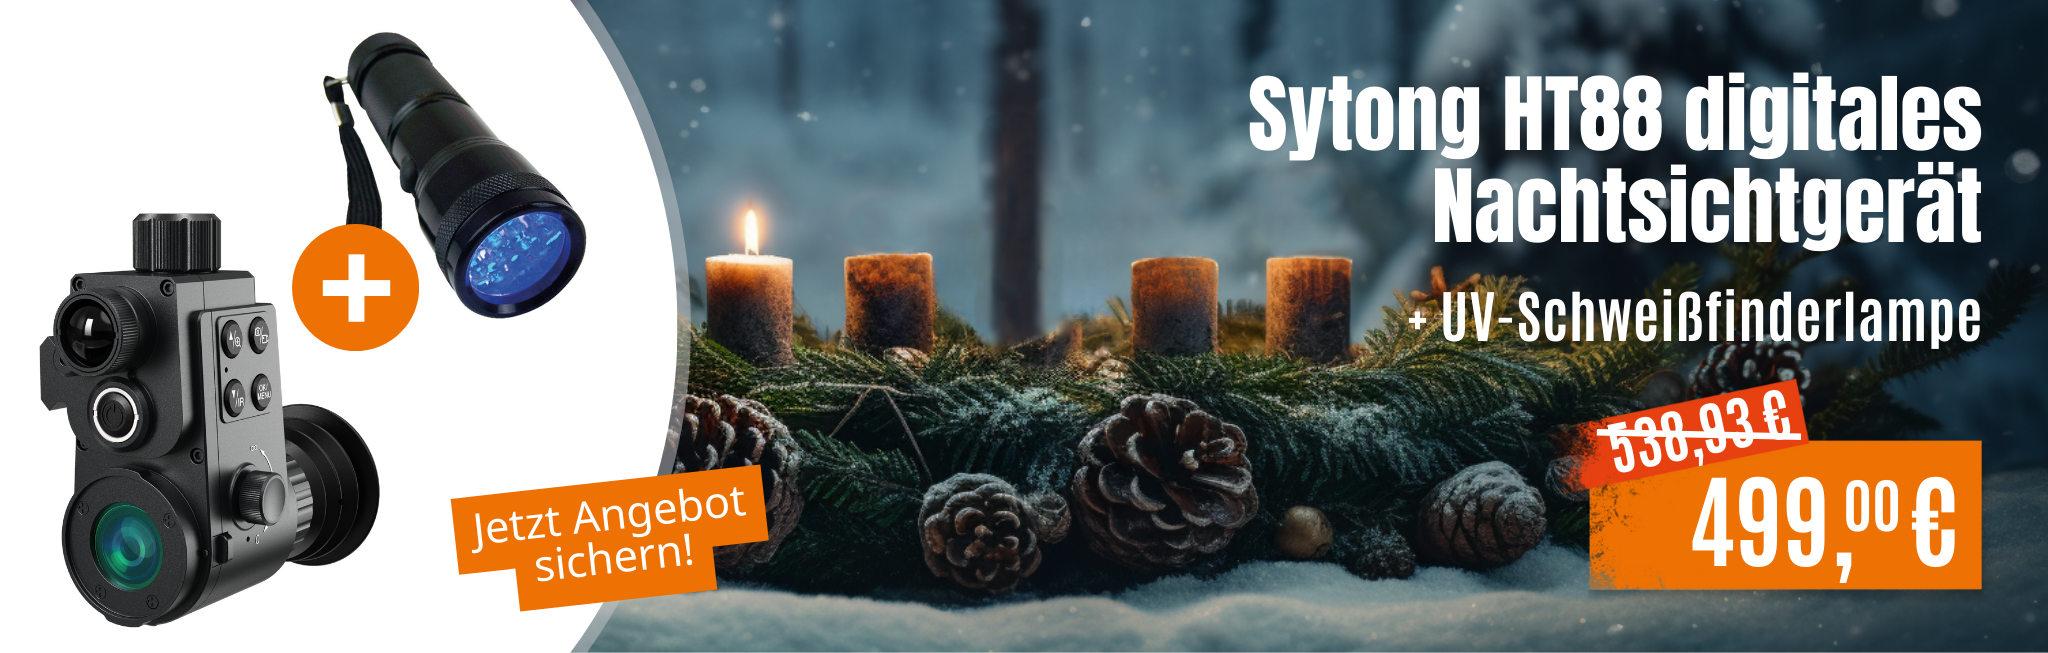 1. Advent_Sparset Sytong